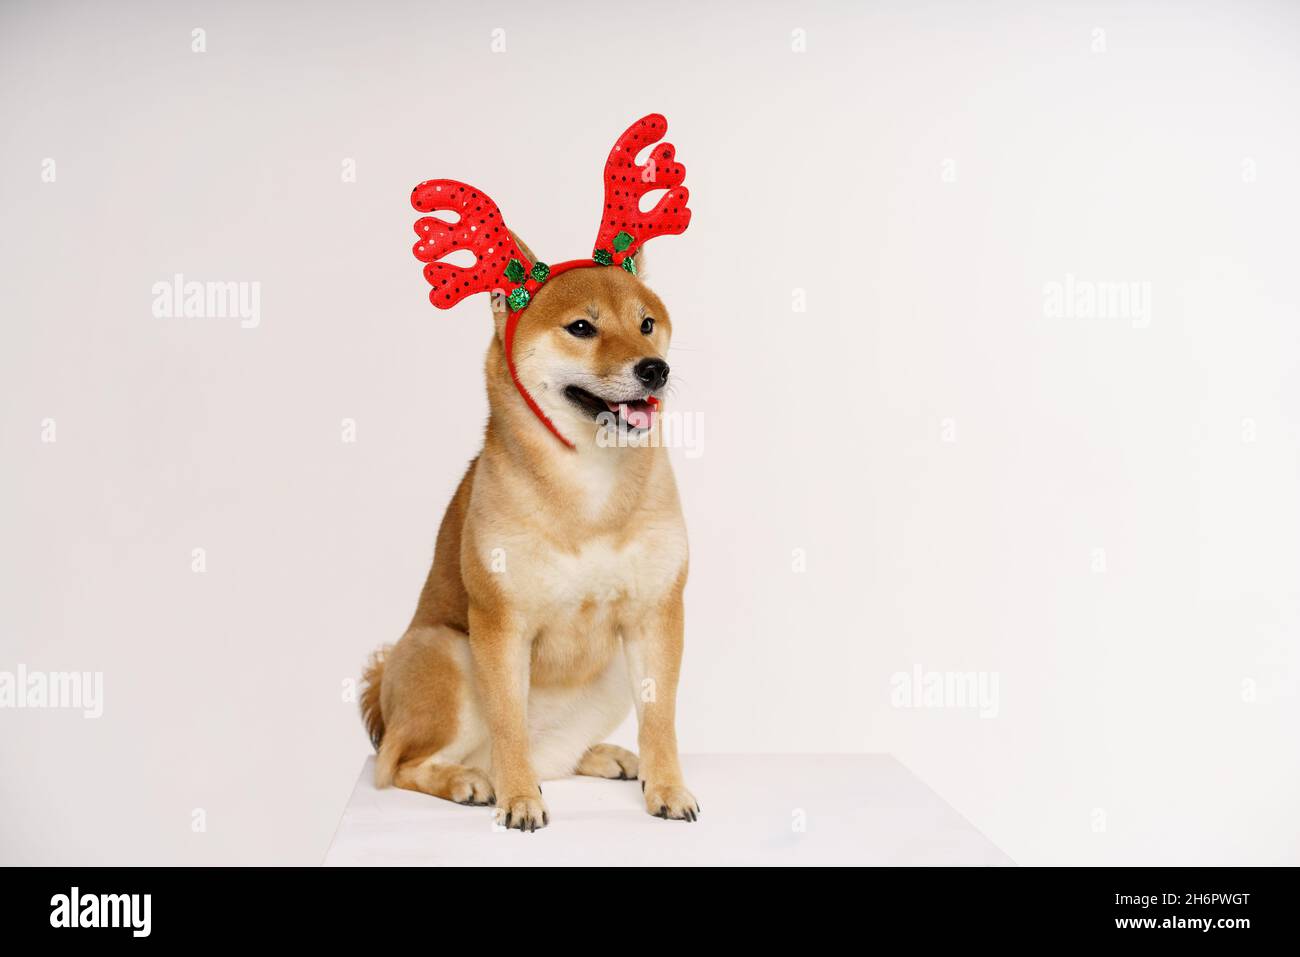 New year and christmas concept with dog wearing red deer antlers headband on solid light background Stock Photo